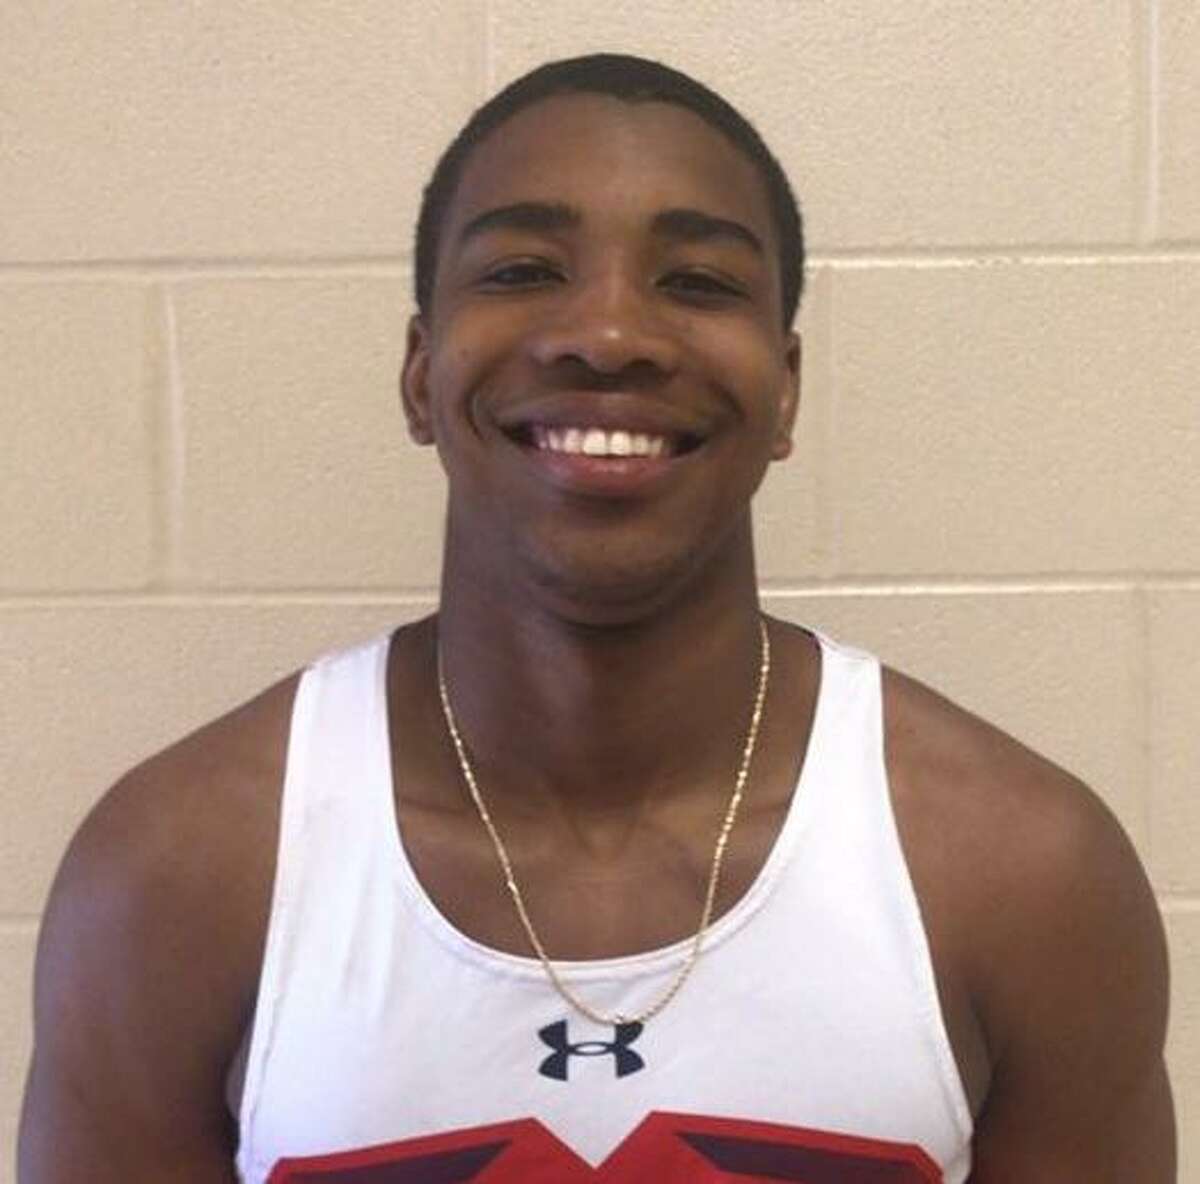 Rashod Owens is a junior track and field athlete for Roosevelt.